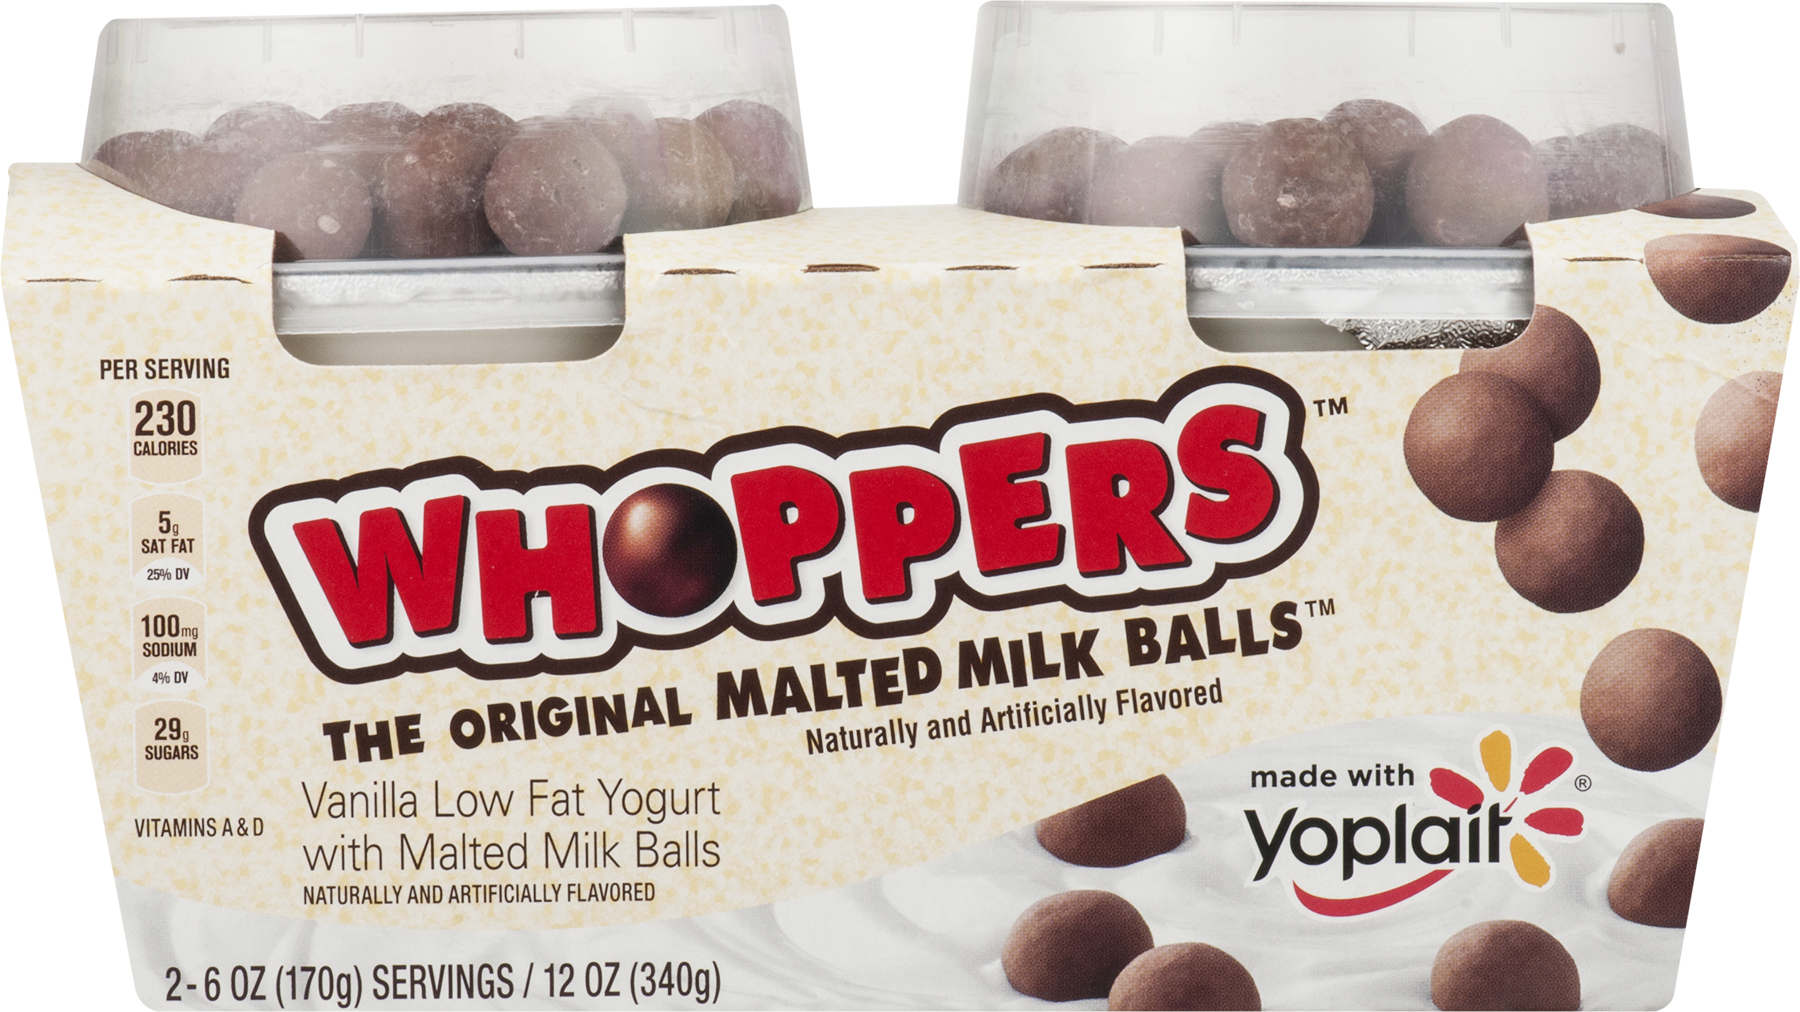 Download Yoplait Vanilla Low Fat Yogurt With Whoppers Malted